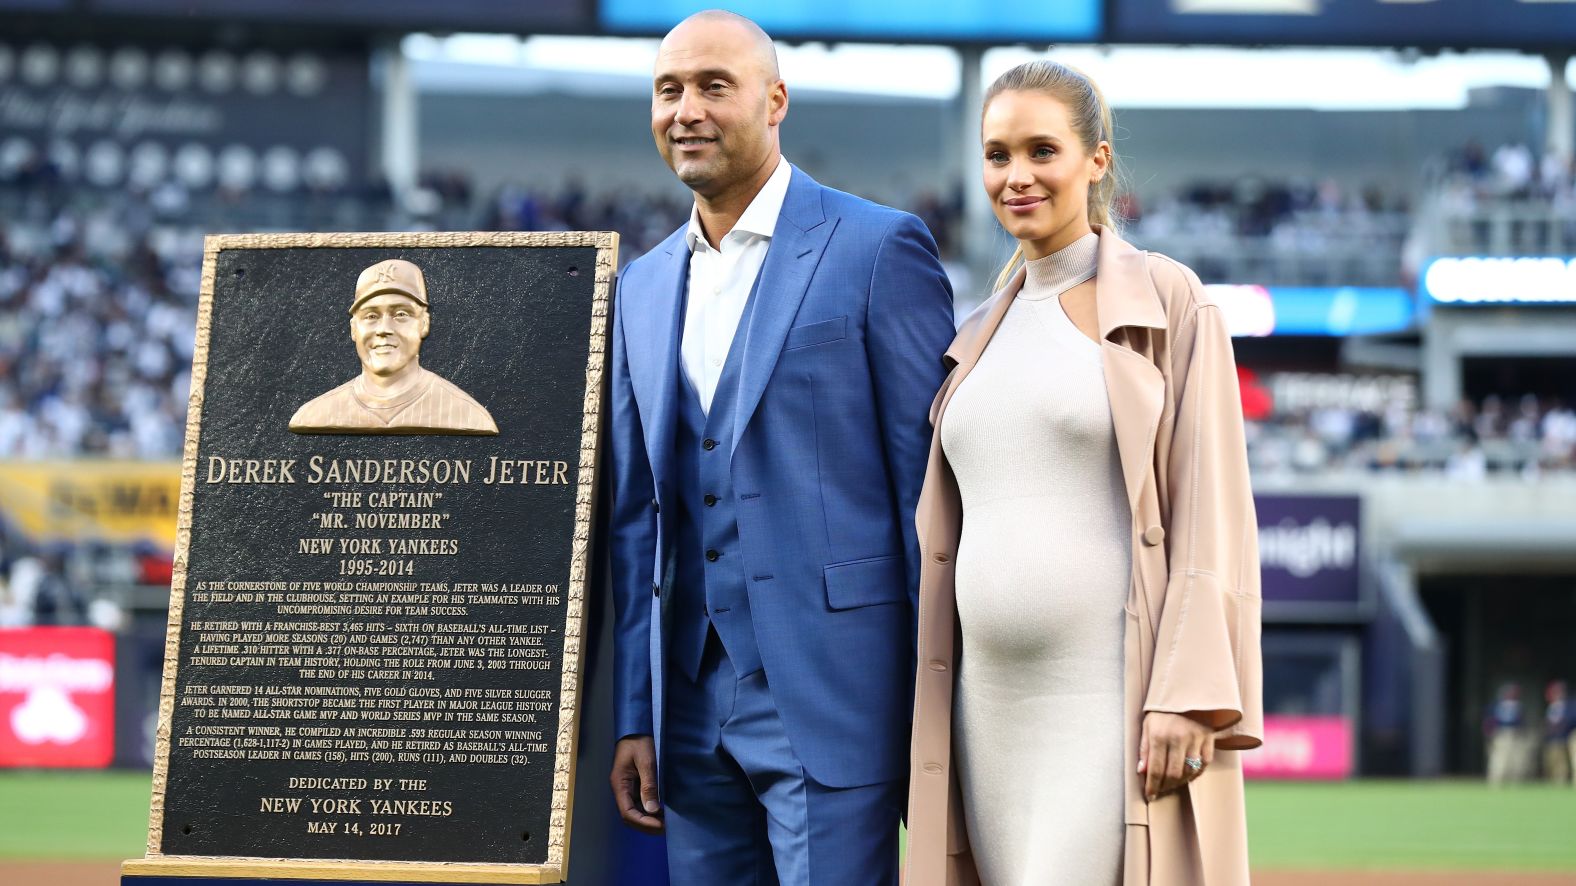 Jeter and his wife, Hannah, pose for photos during his retirement ceremony in May 2017.